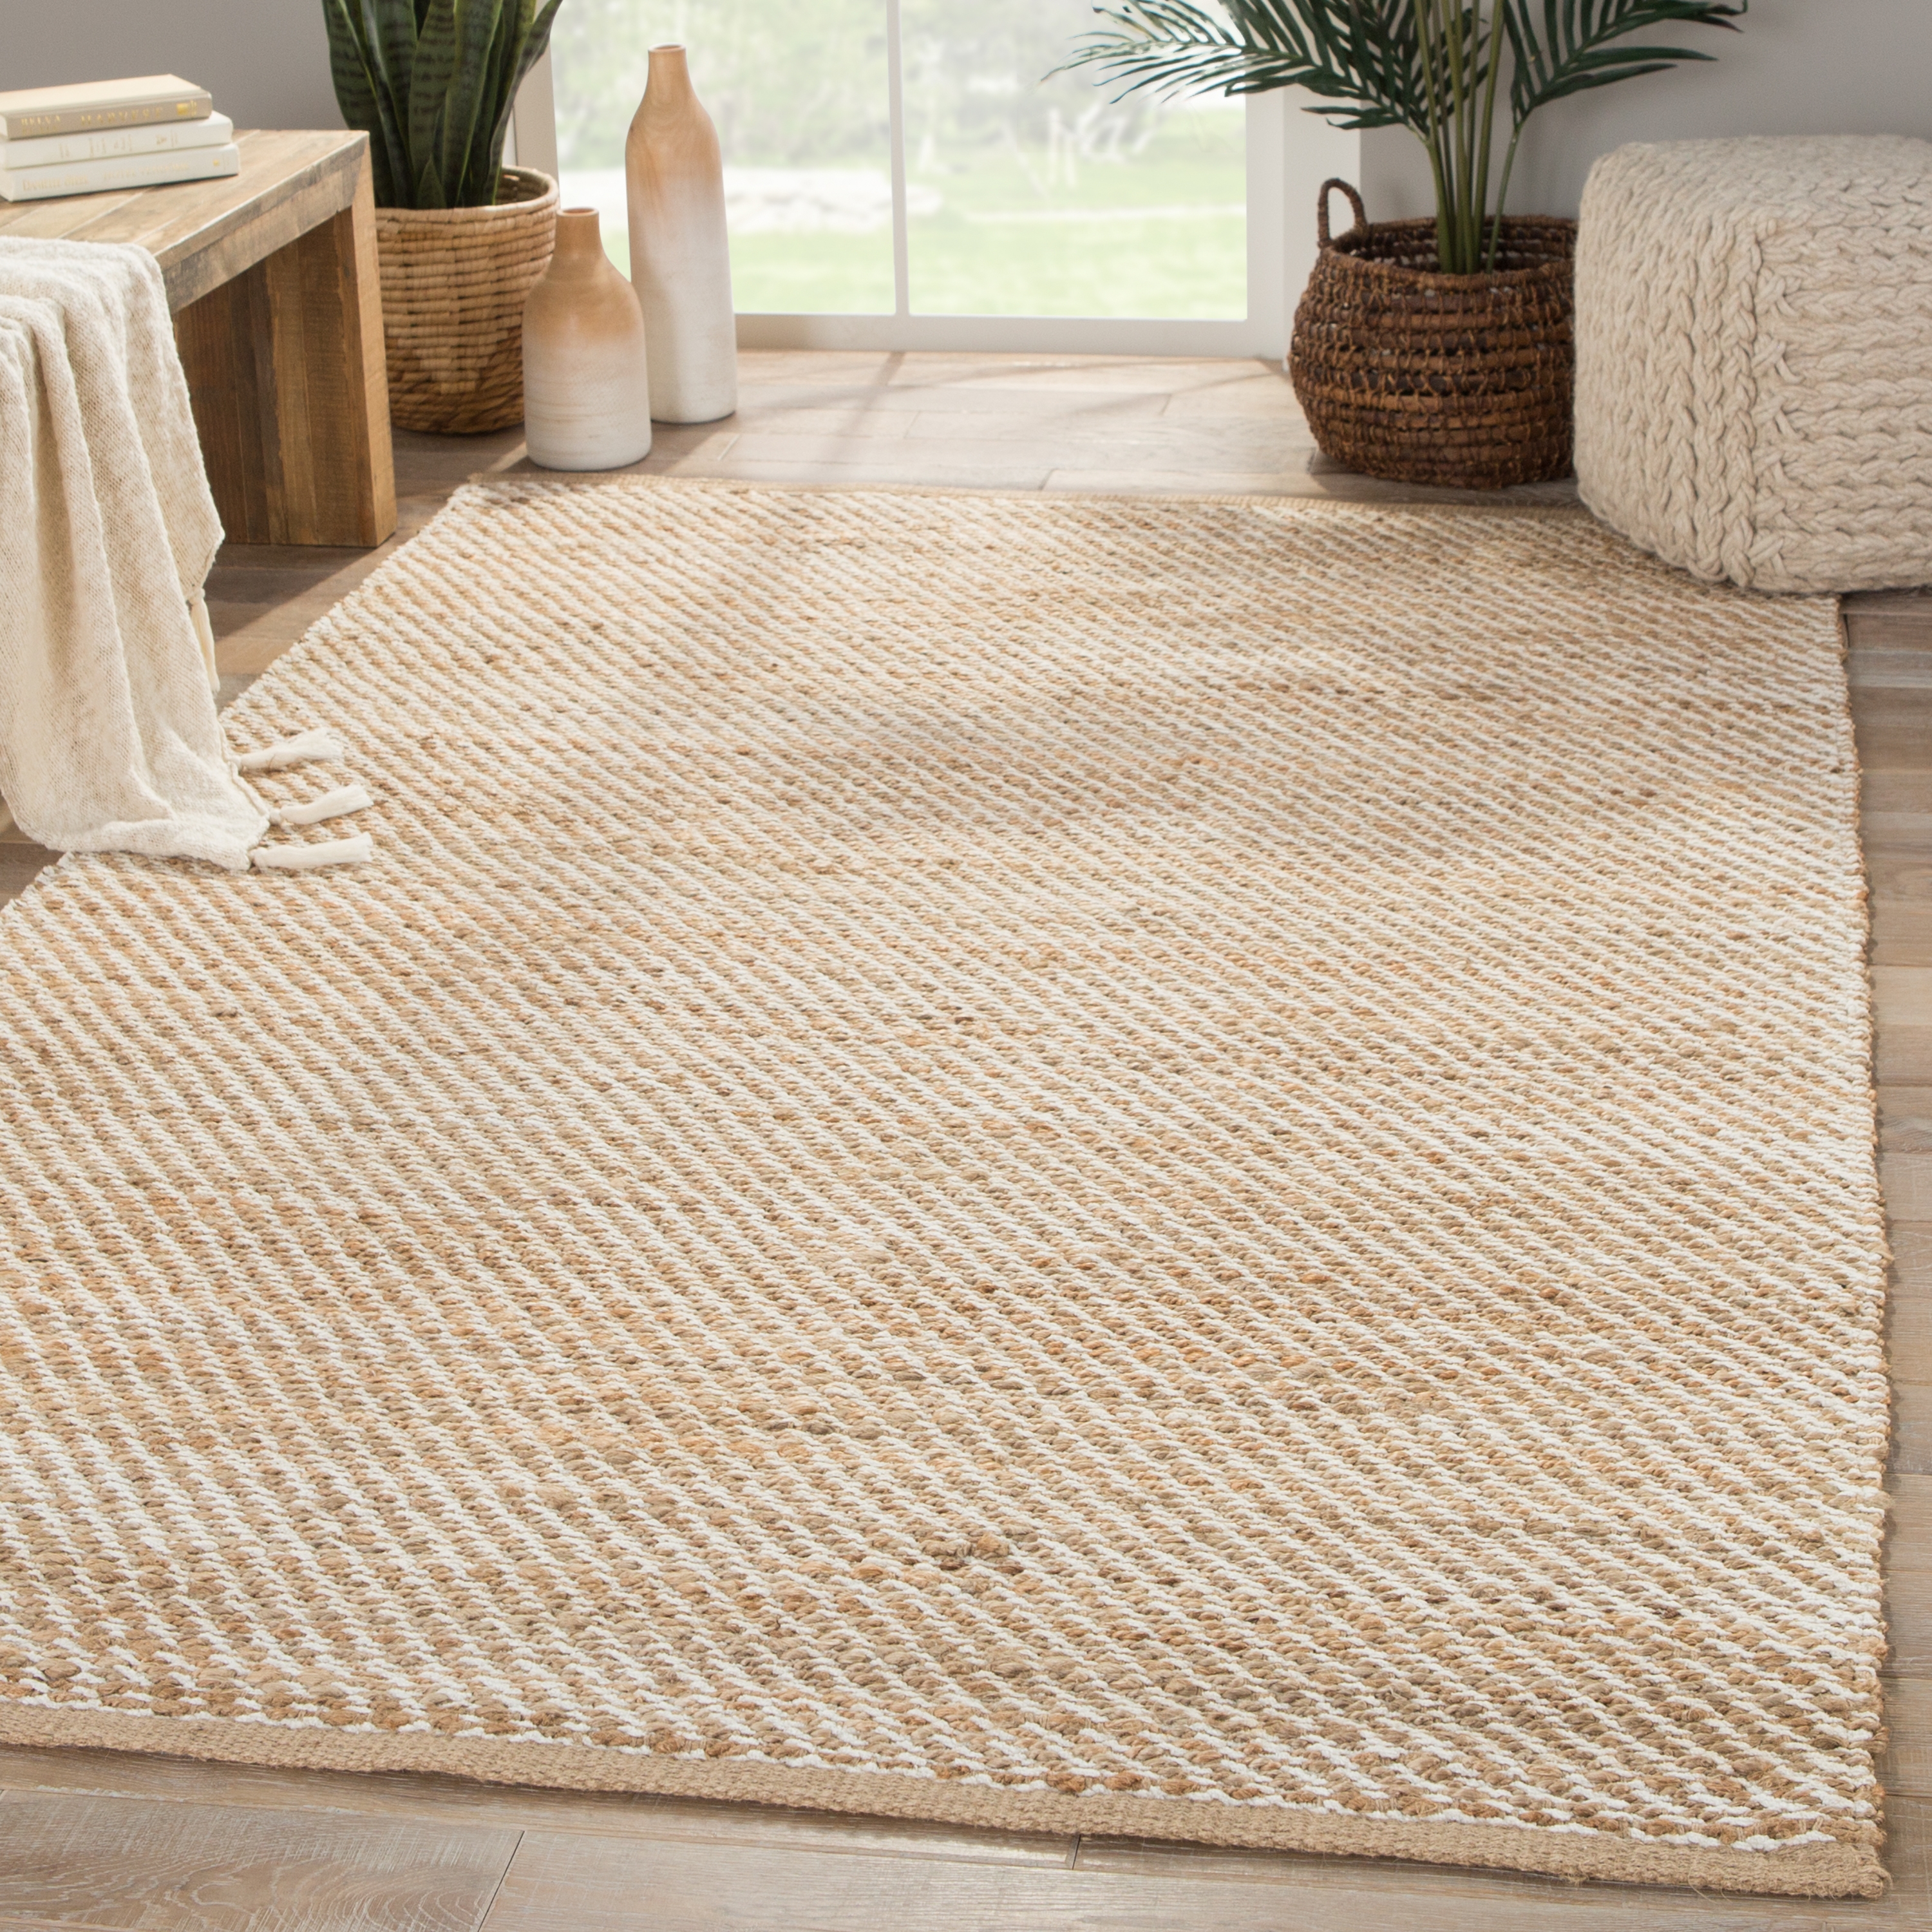 Diagonal Weave Natural Solid Beige/ White Area Rug (8' X 10') - Image 4